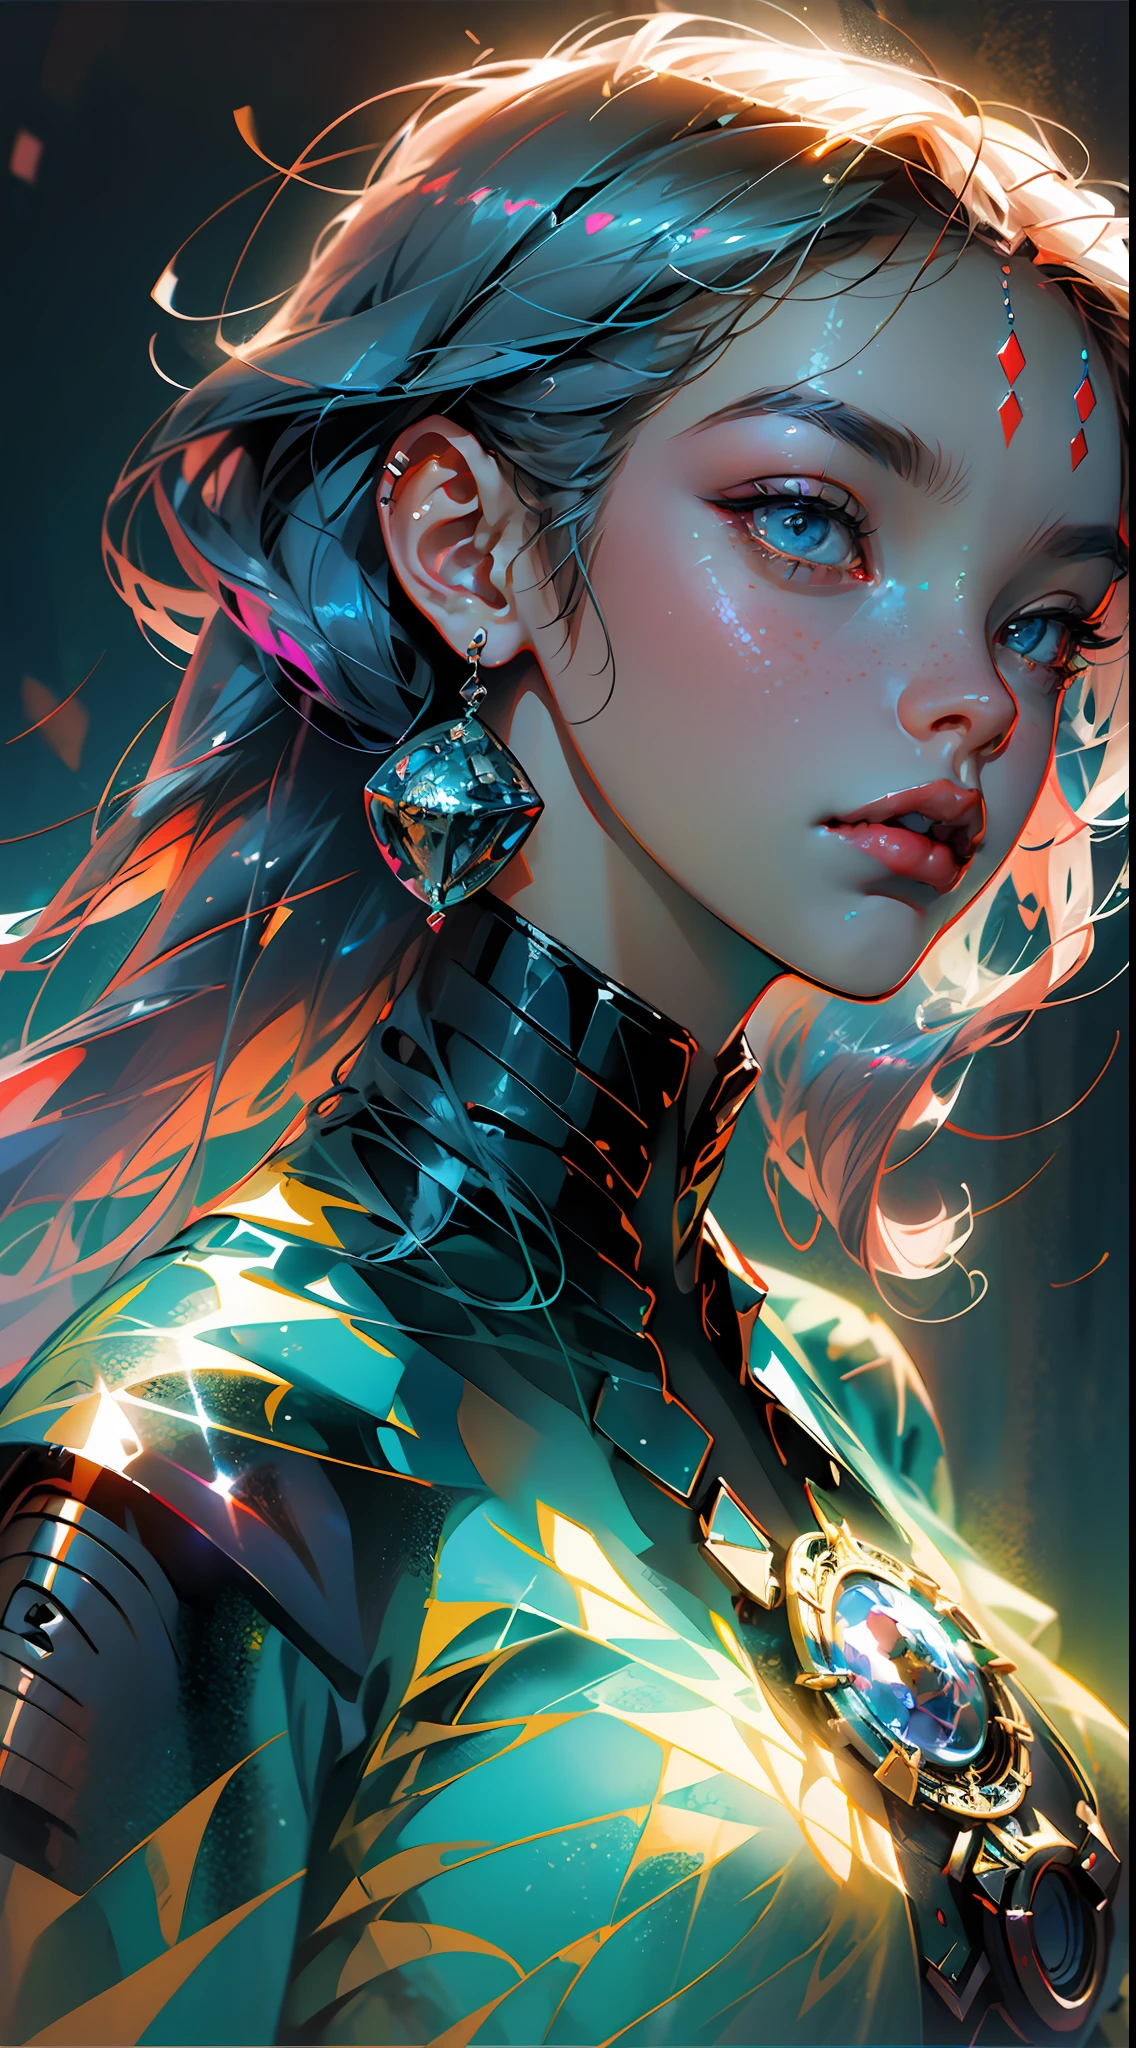 a closeup of a woman with a futuristic body and head, Beautiful Sci Portrait - Being a Girl, Sci-Be Digital Art, Futuristic Digital Art, Beautiful Digital Art, Cyborg Goddess in the Cosmos, Highly Detailed Digital Art in 4k, WLOP. Scifi, 4K Digital Art, inspired by Marek Okon, 8 0's tomasz style alen kopera